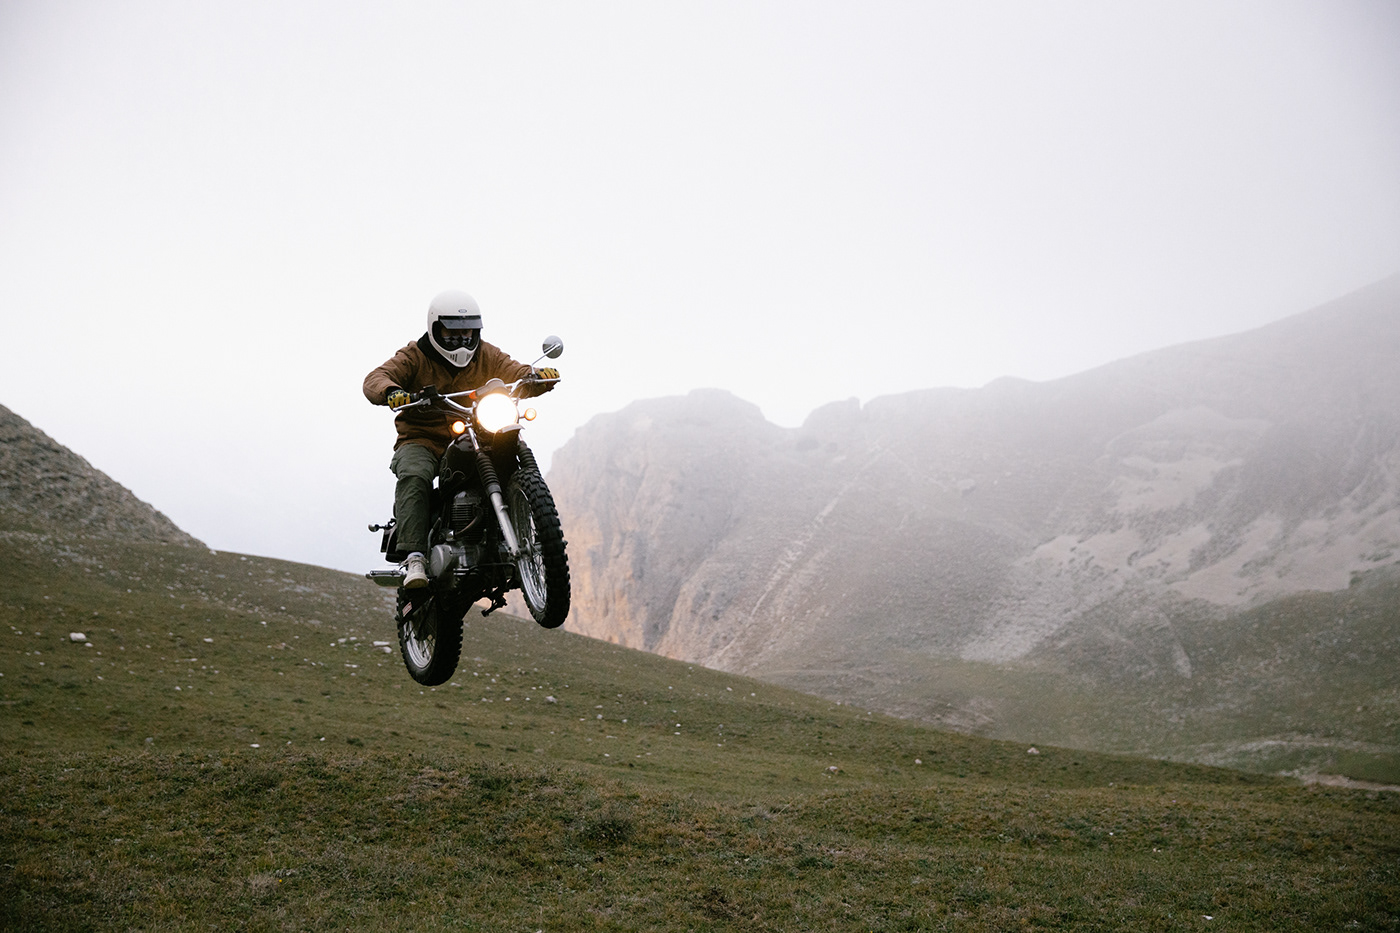 dagestan lifestyle motorcycles mototouring mountains Outdoor reportage Russia touring tourism